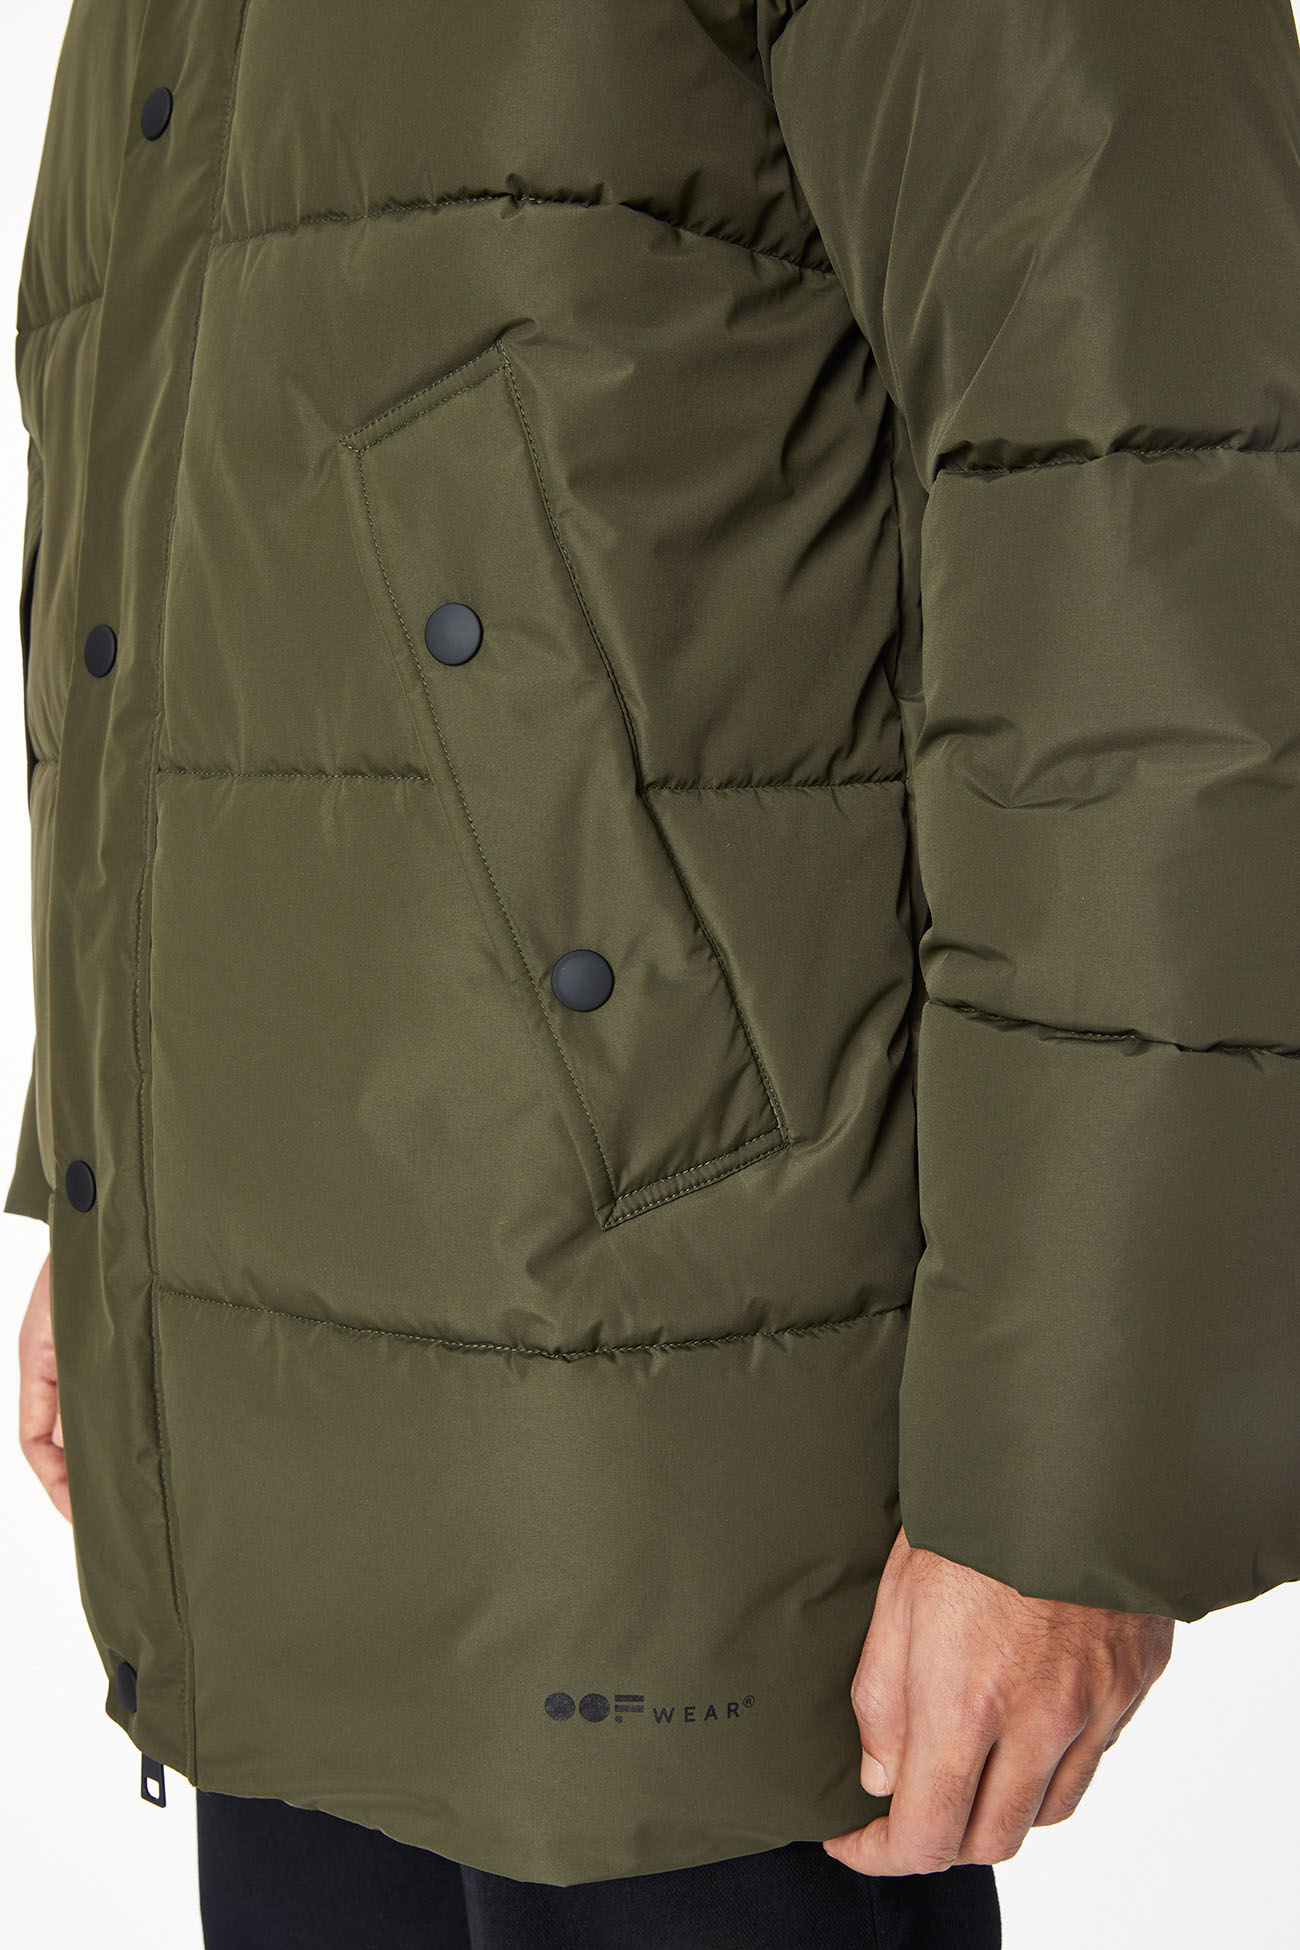 JACKET 5989 MADE IN WATER RESISTANT NYLON - MOSS GREEN - OOF WEAR